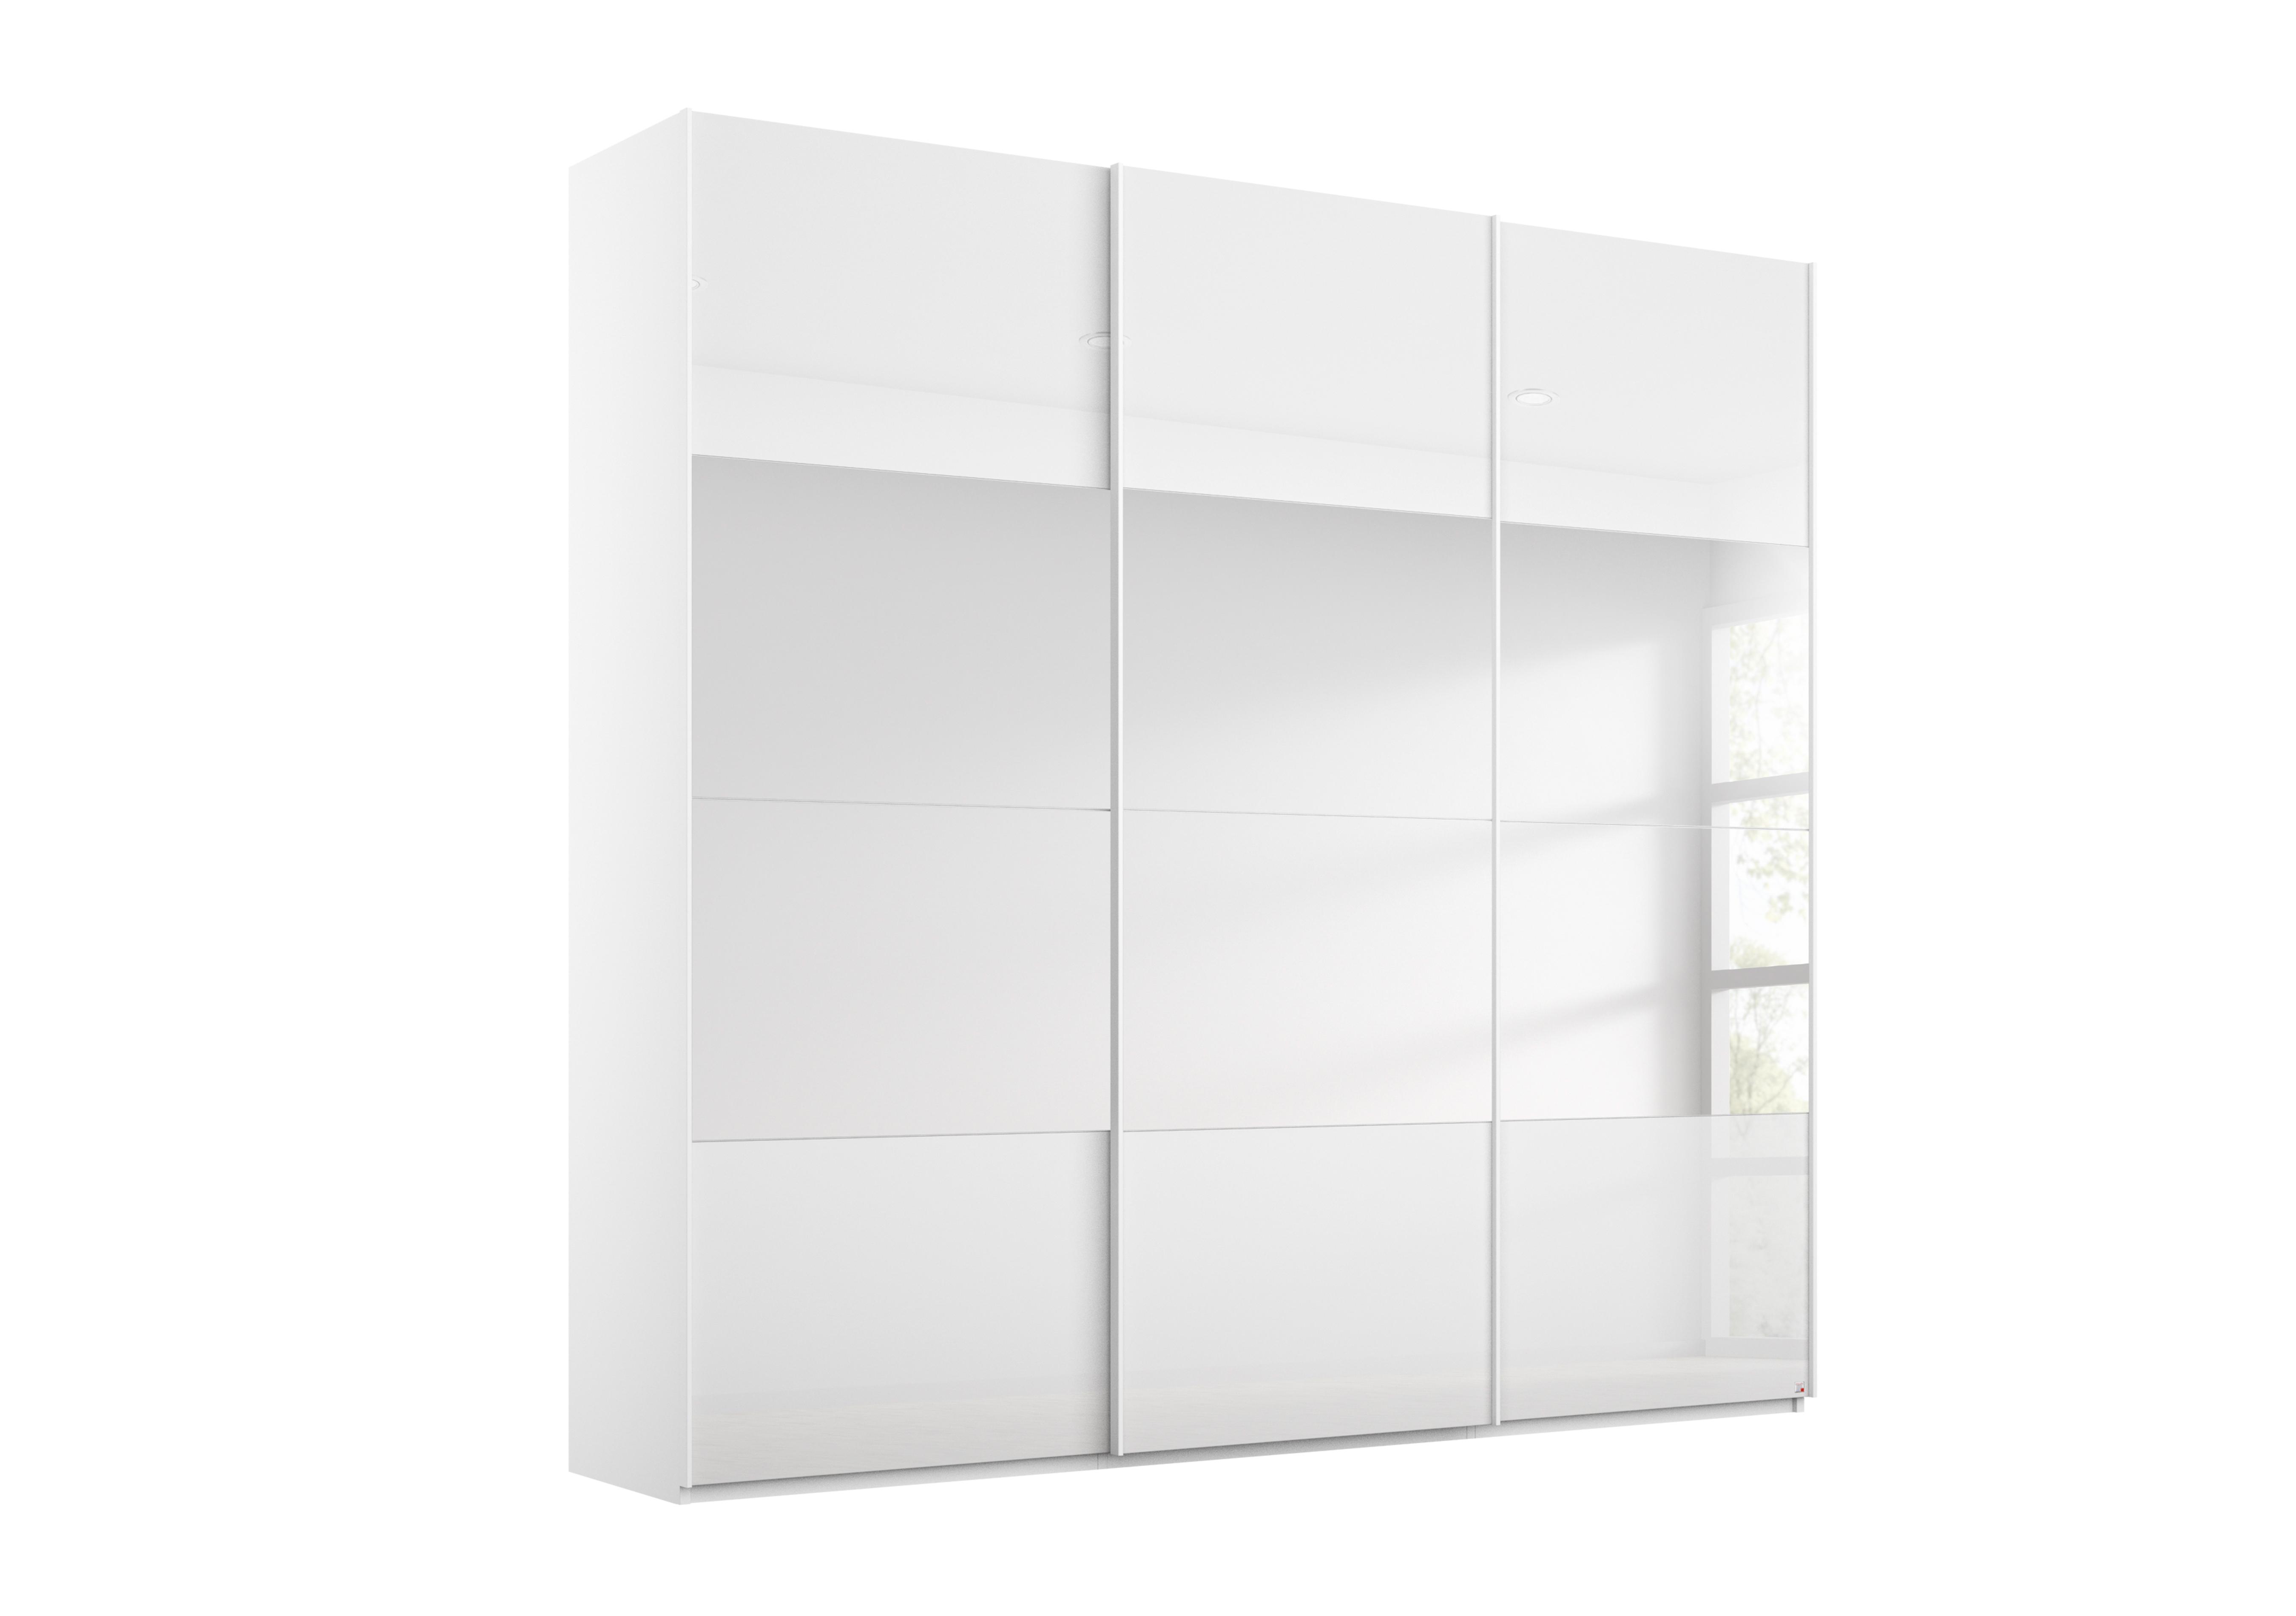 Formes Glass 3 Door Sliding Wardrobe with Horizontal Mirrors in A131b White White Front on Furniture Village